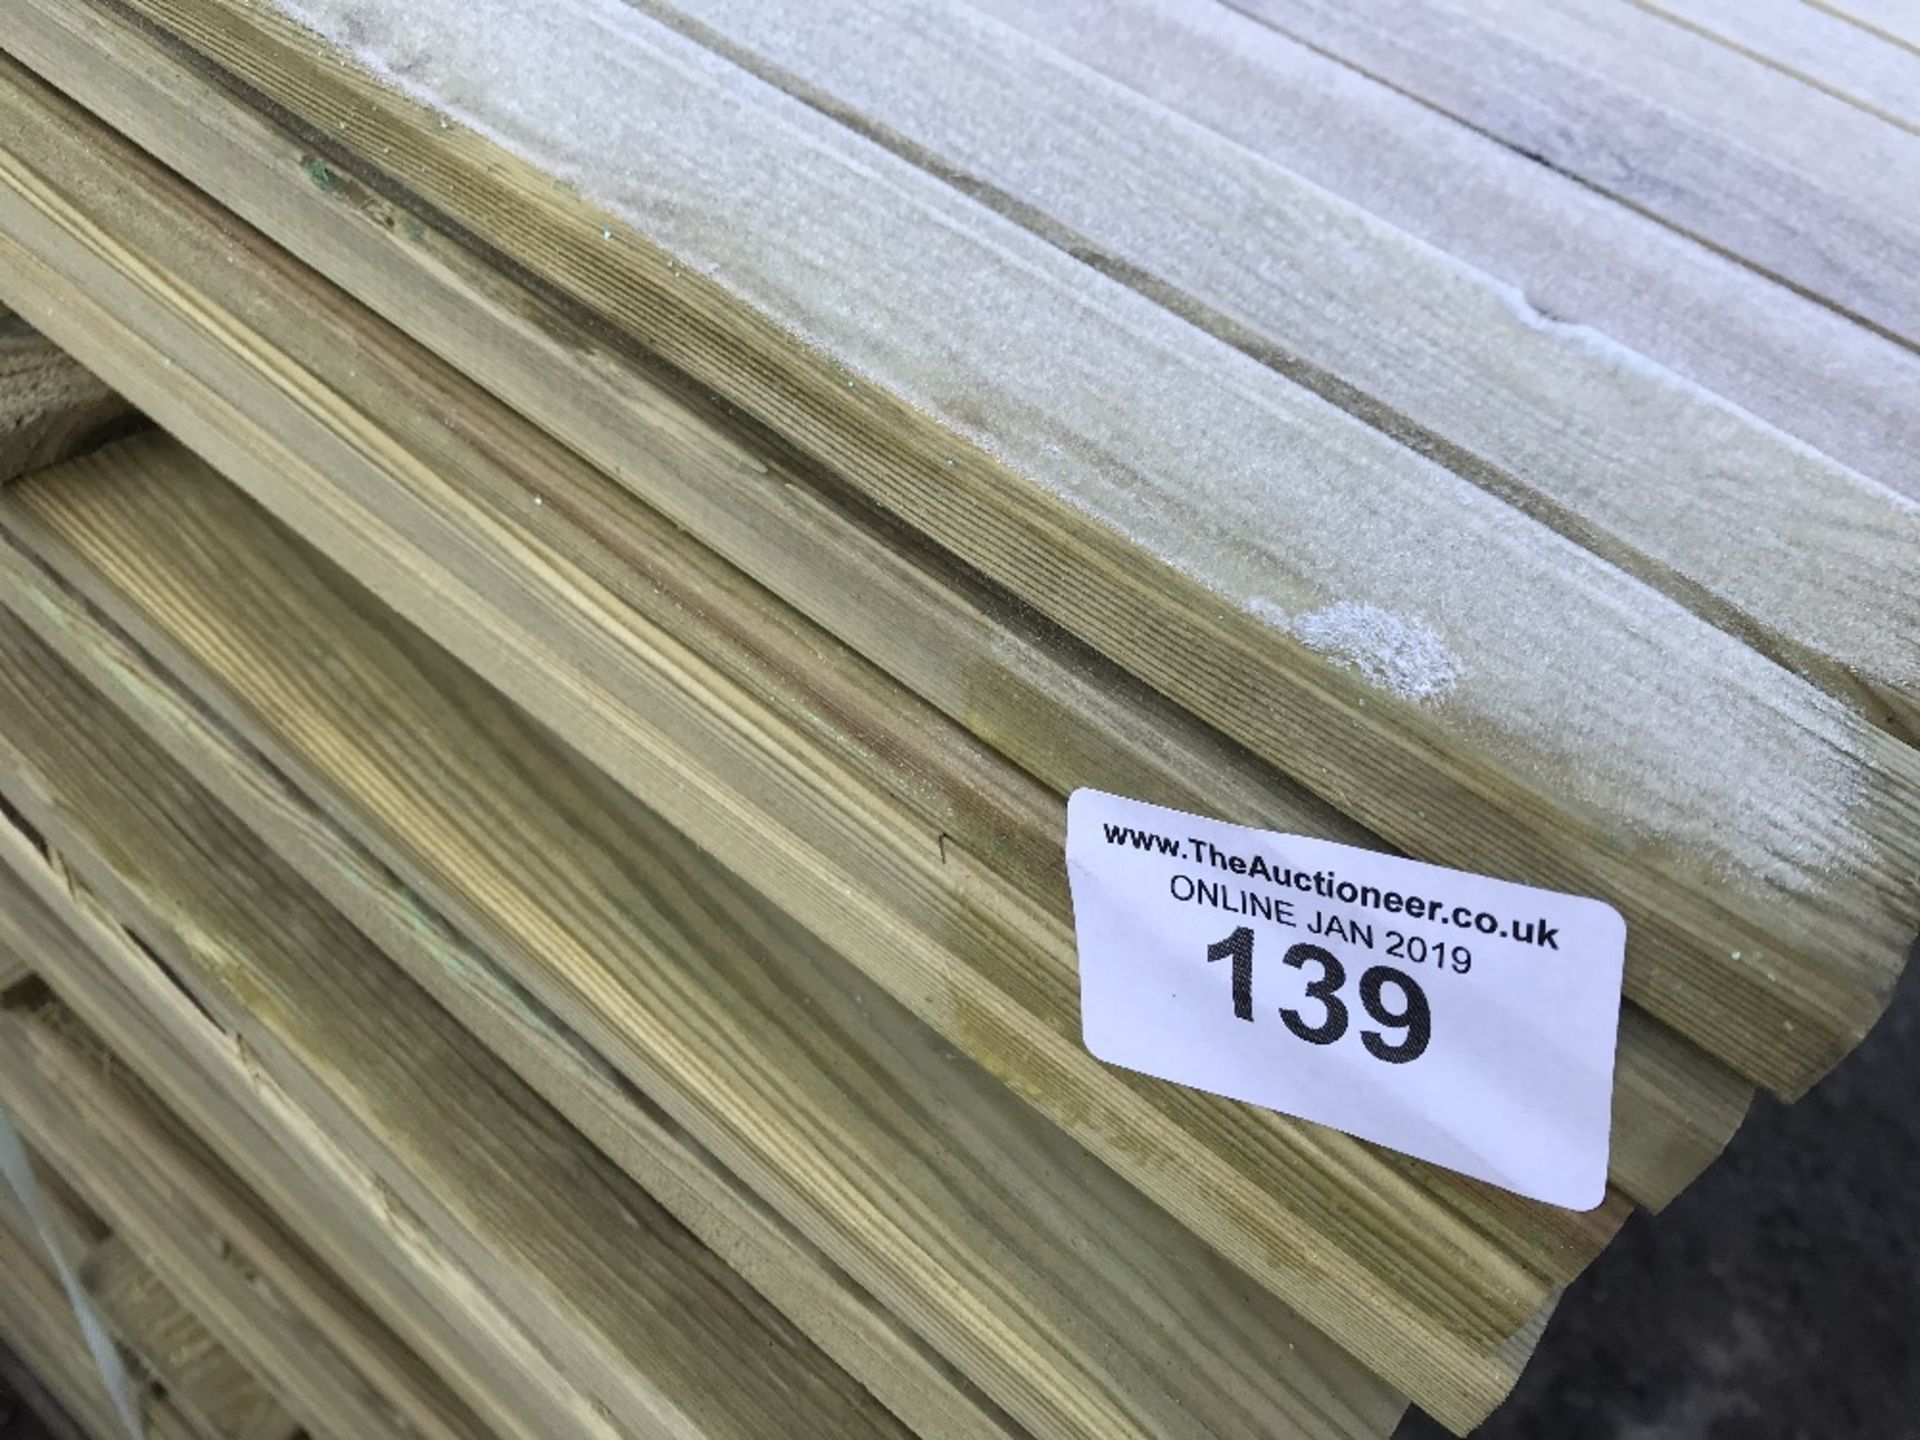 2 X PALLETS OF 5CM X 1.5CM X 1.83M LENGTH TIMBER FENCING SLATS - Image 3 of 3